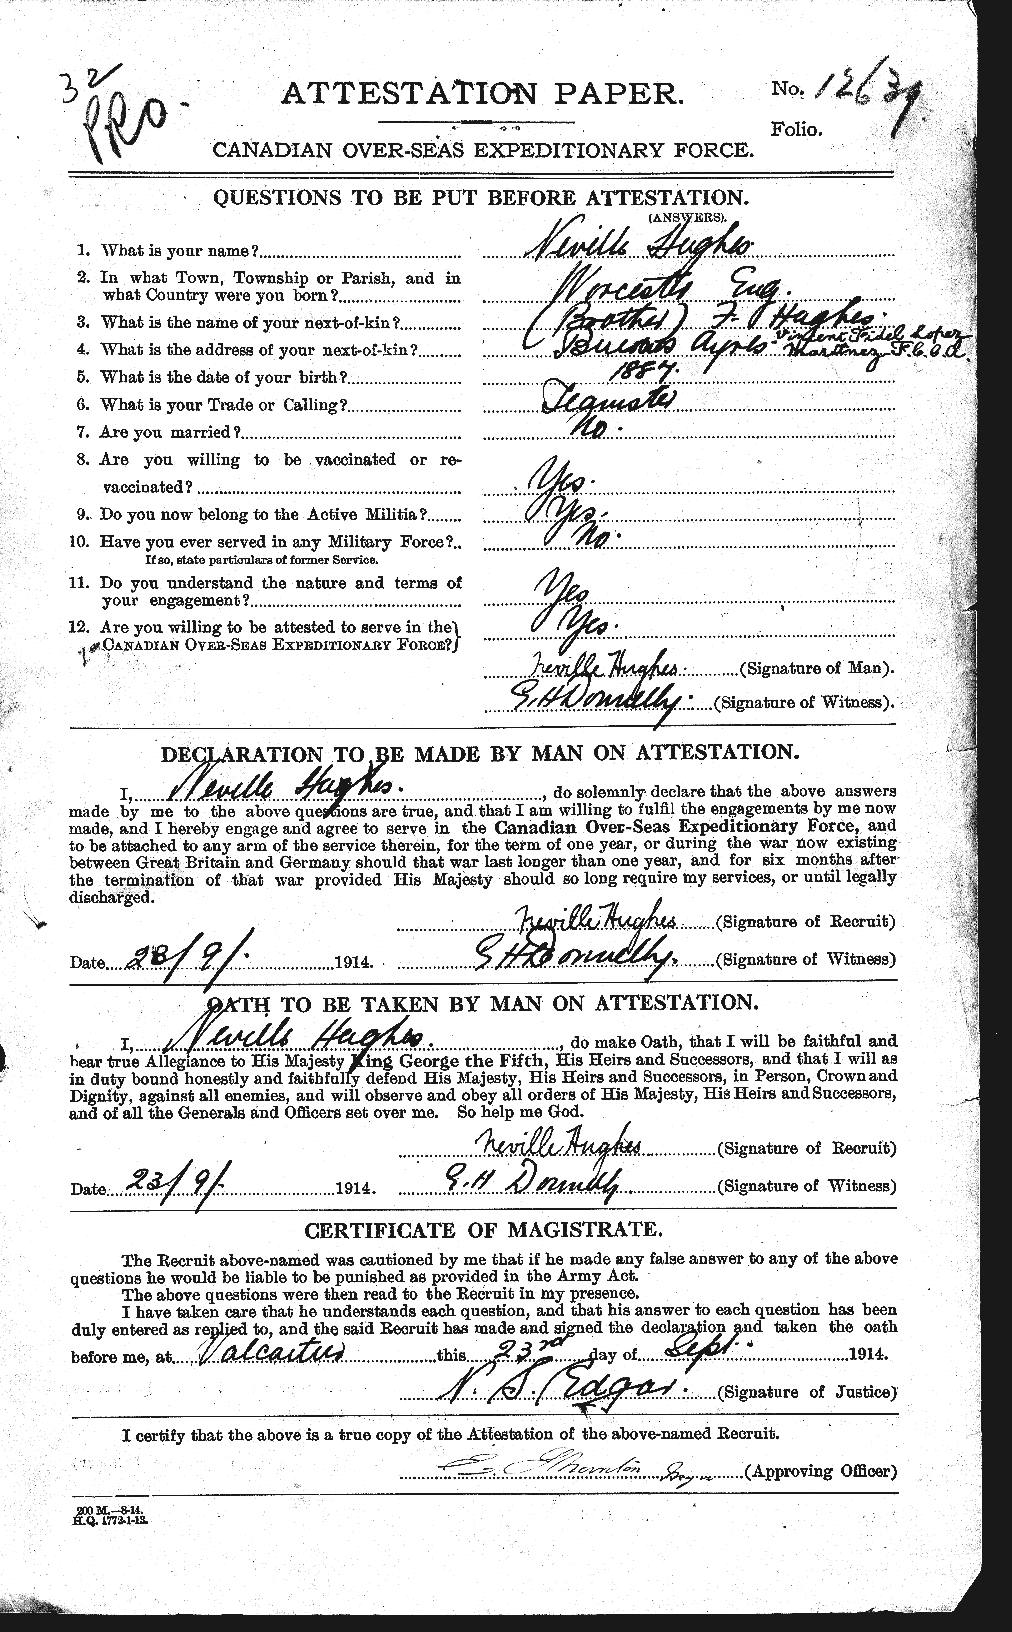 Personnel Records of the First World War - CEF 404128a